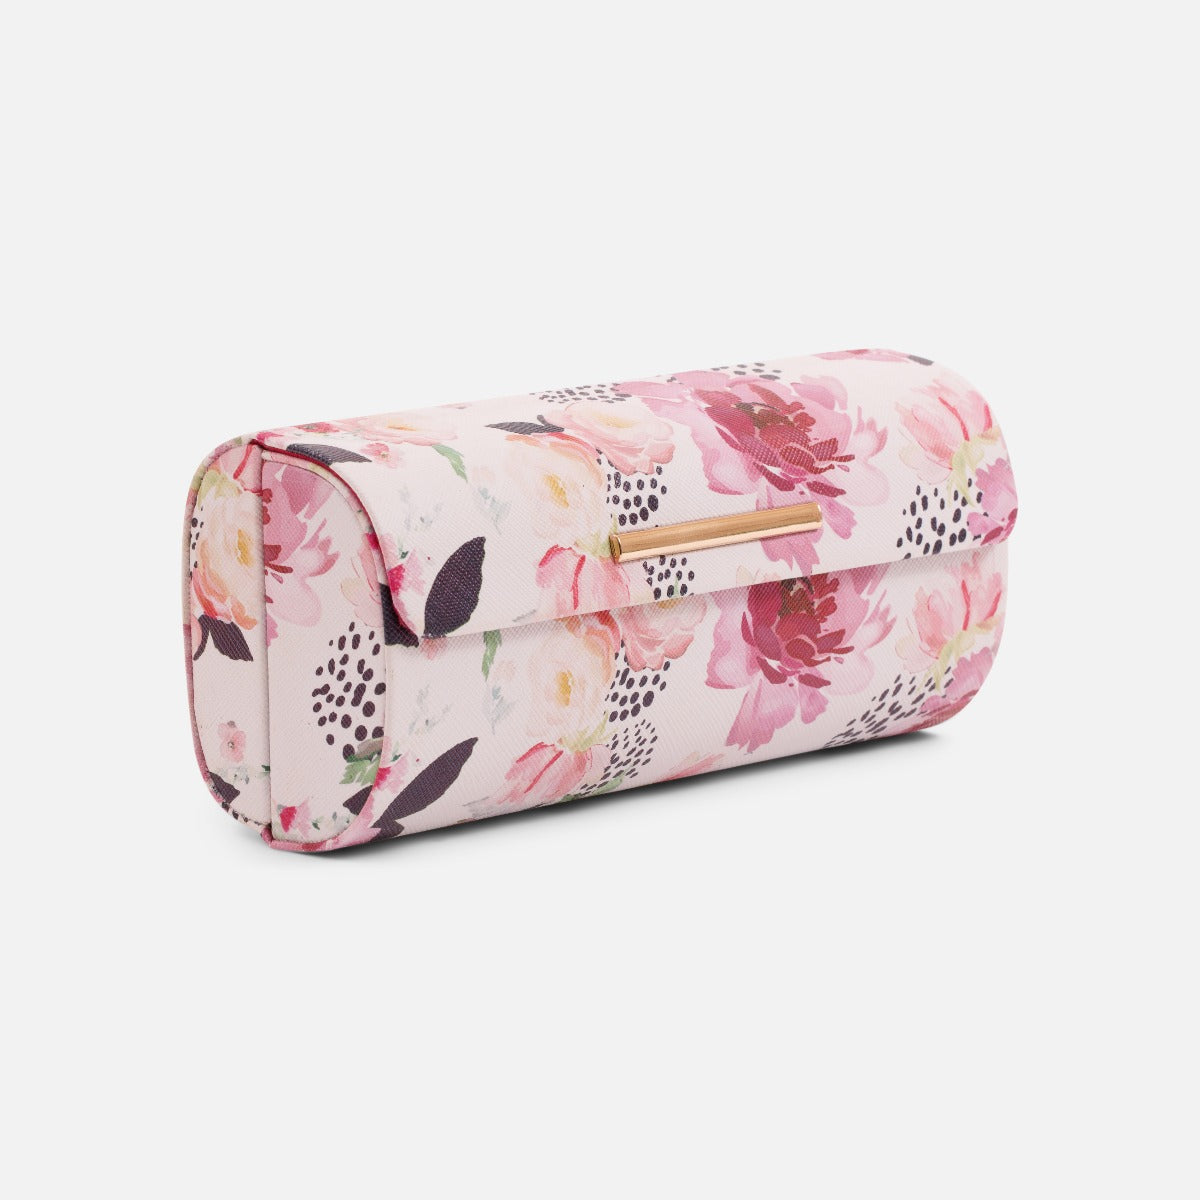 Glasses case with flowers